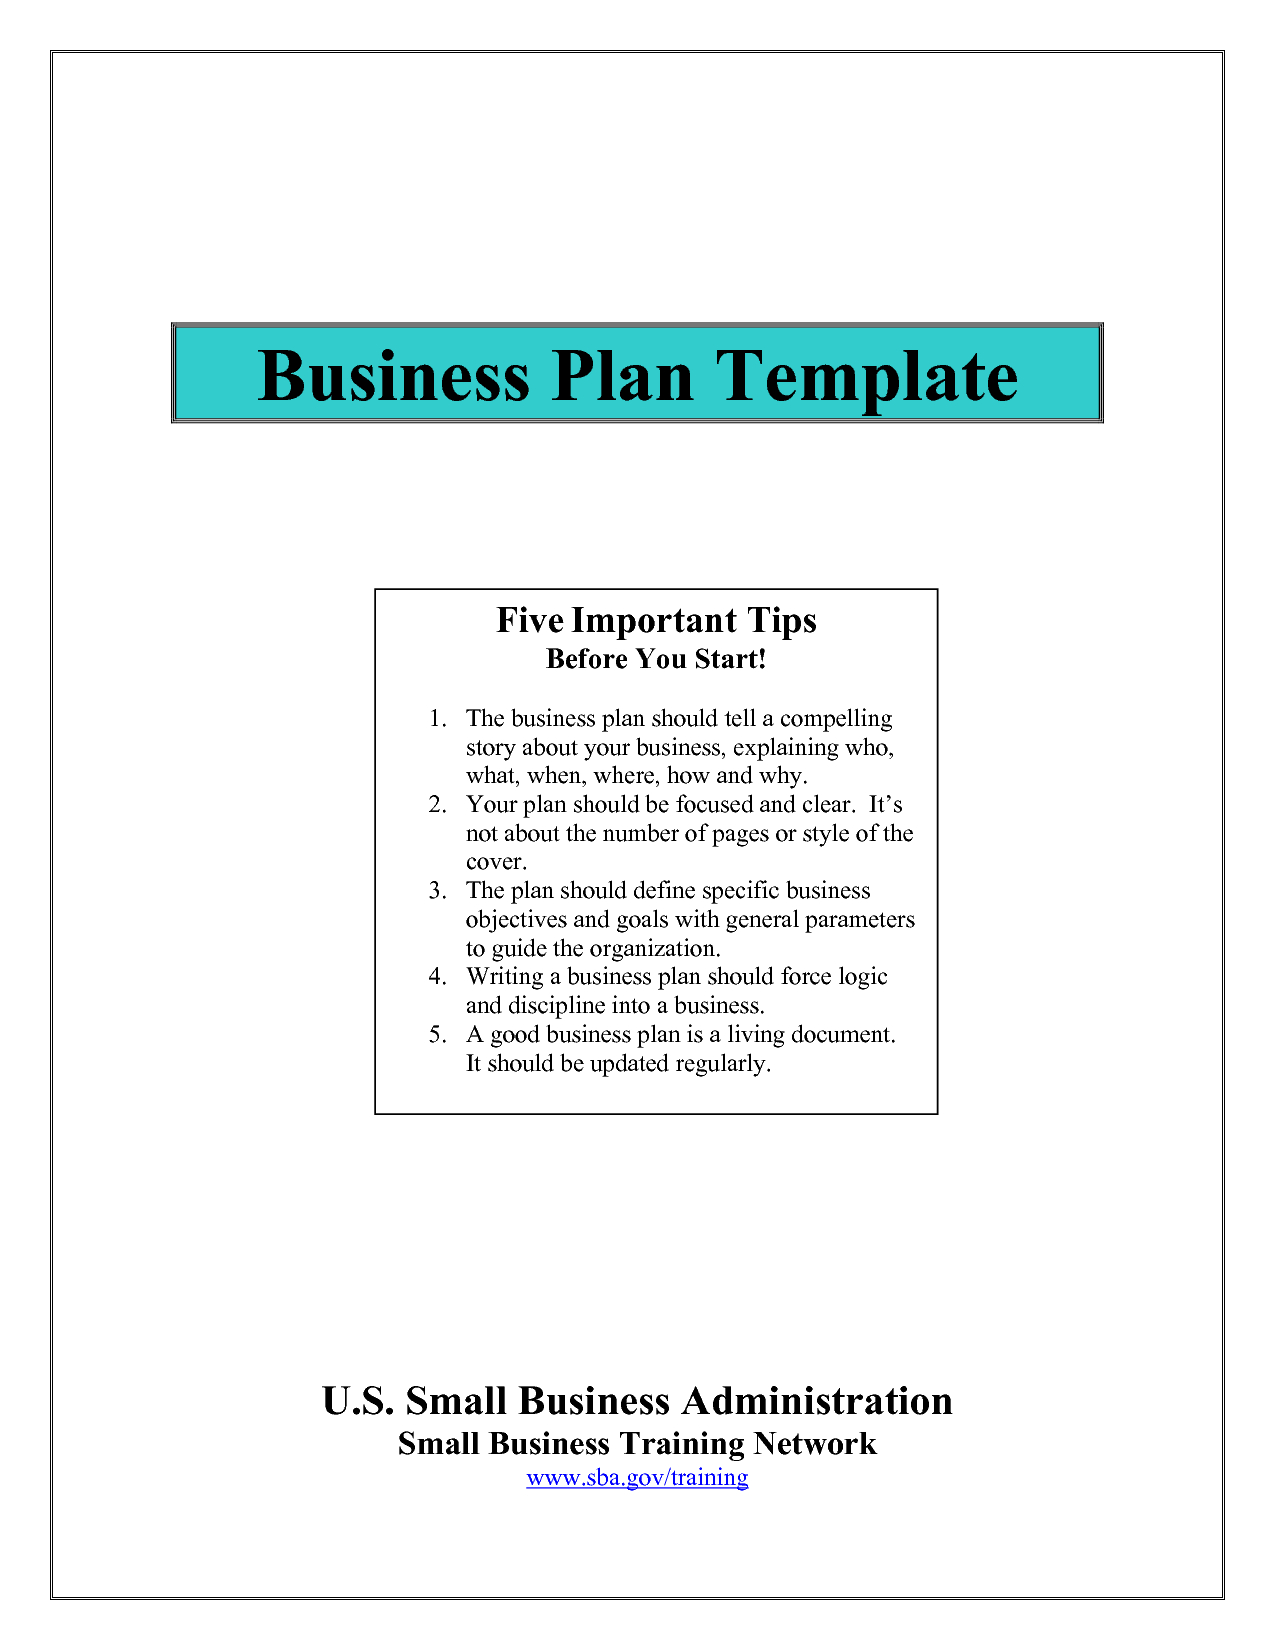 Business Plan Template Free Printable Small Word Document Within Business Plan Template Free Word Document